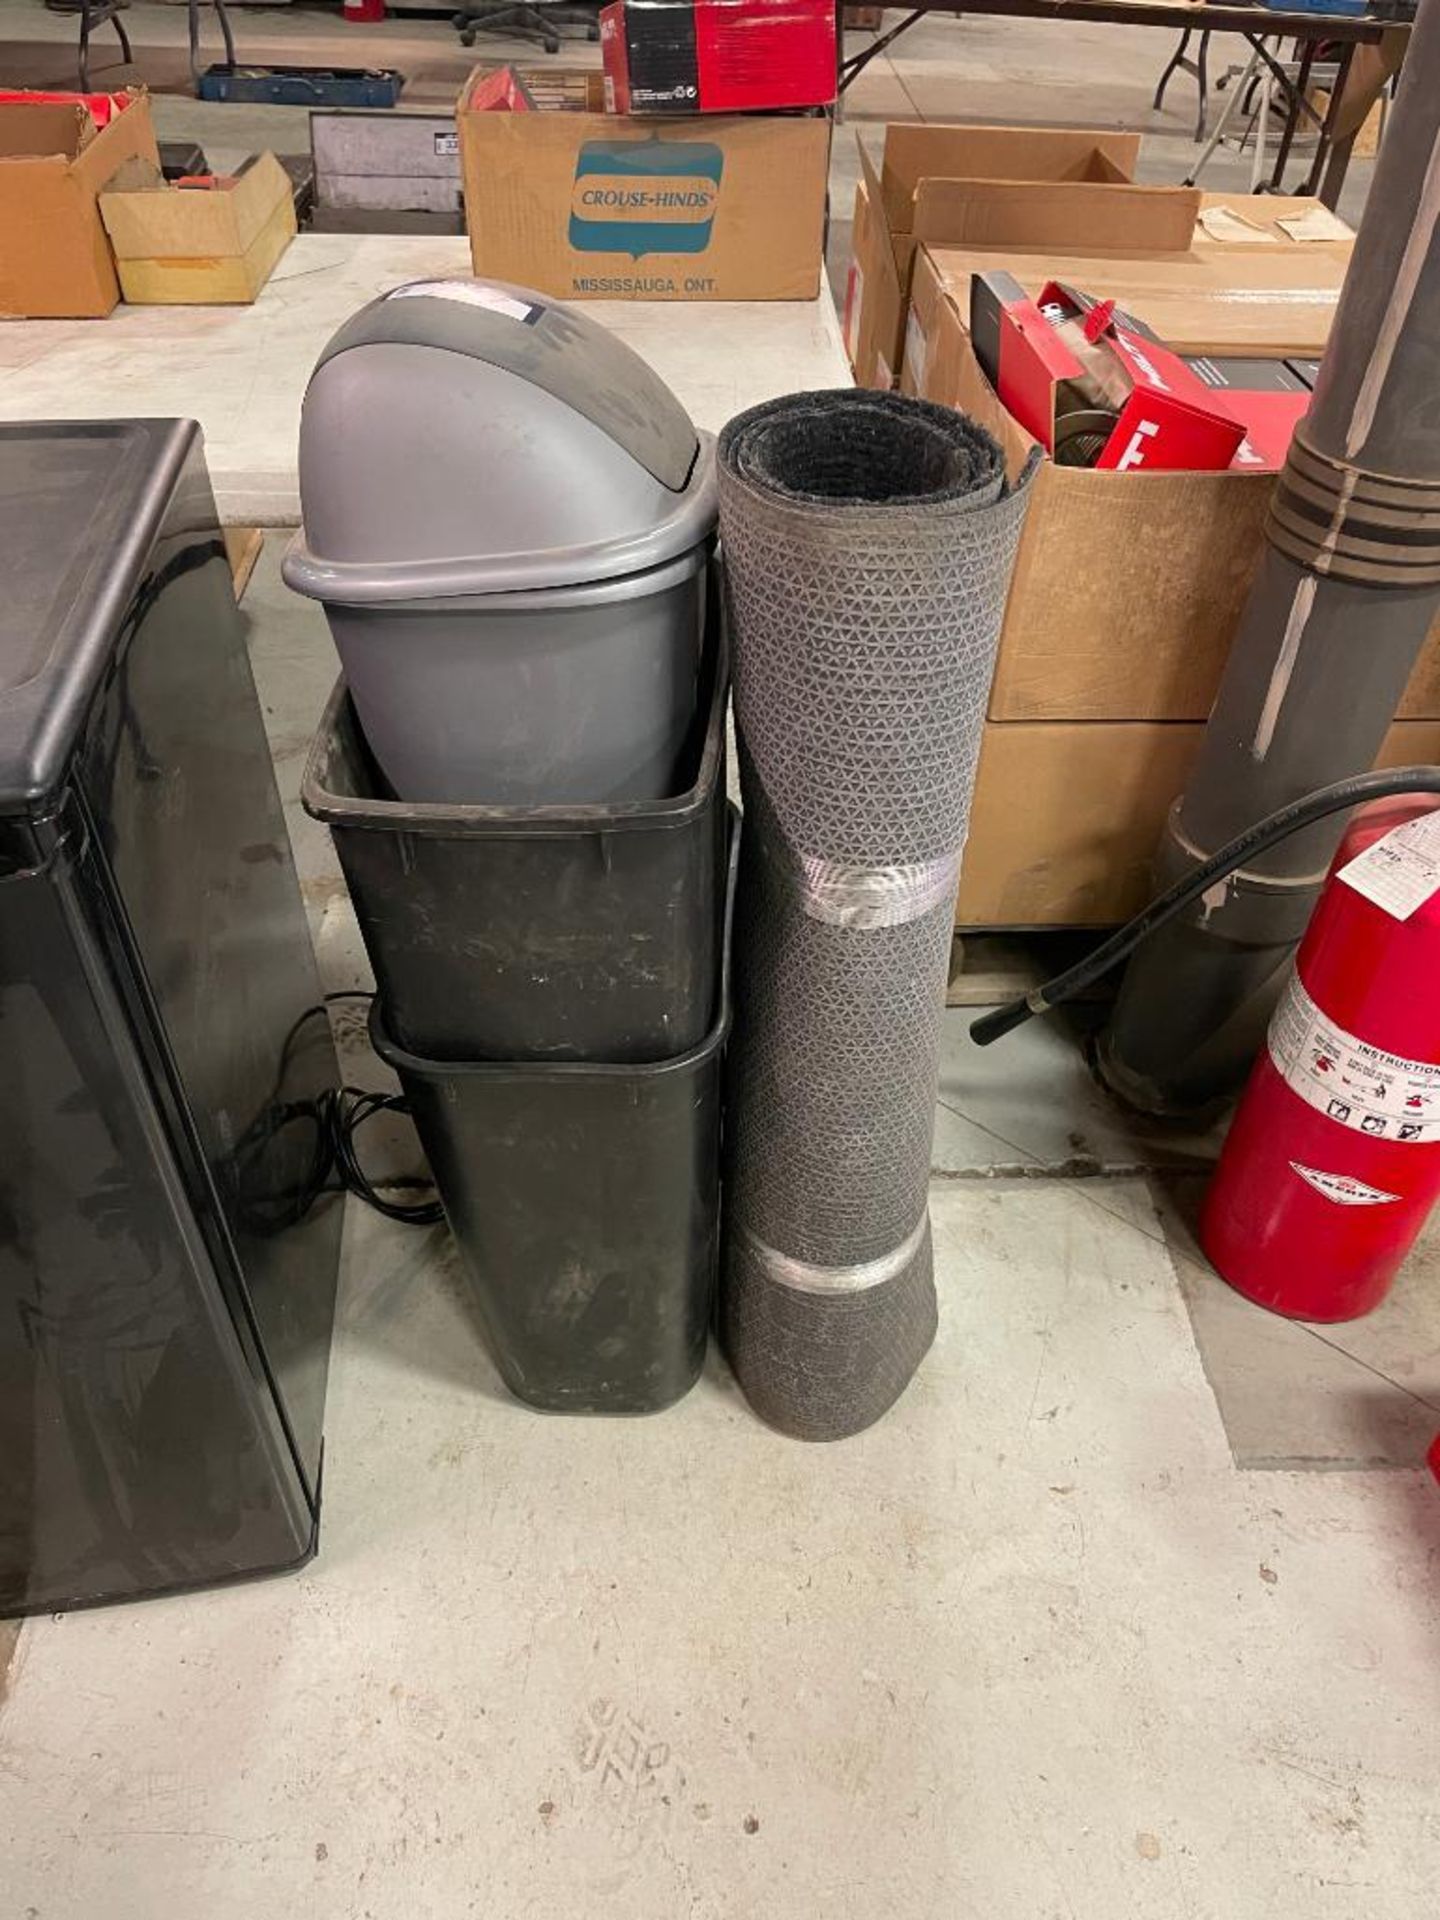 Lot of (4) Asst. Waste Bins and Rug